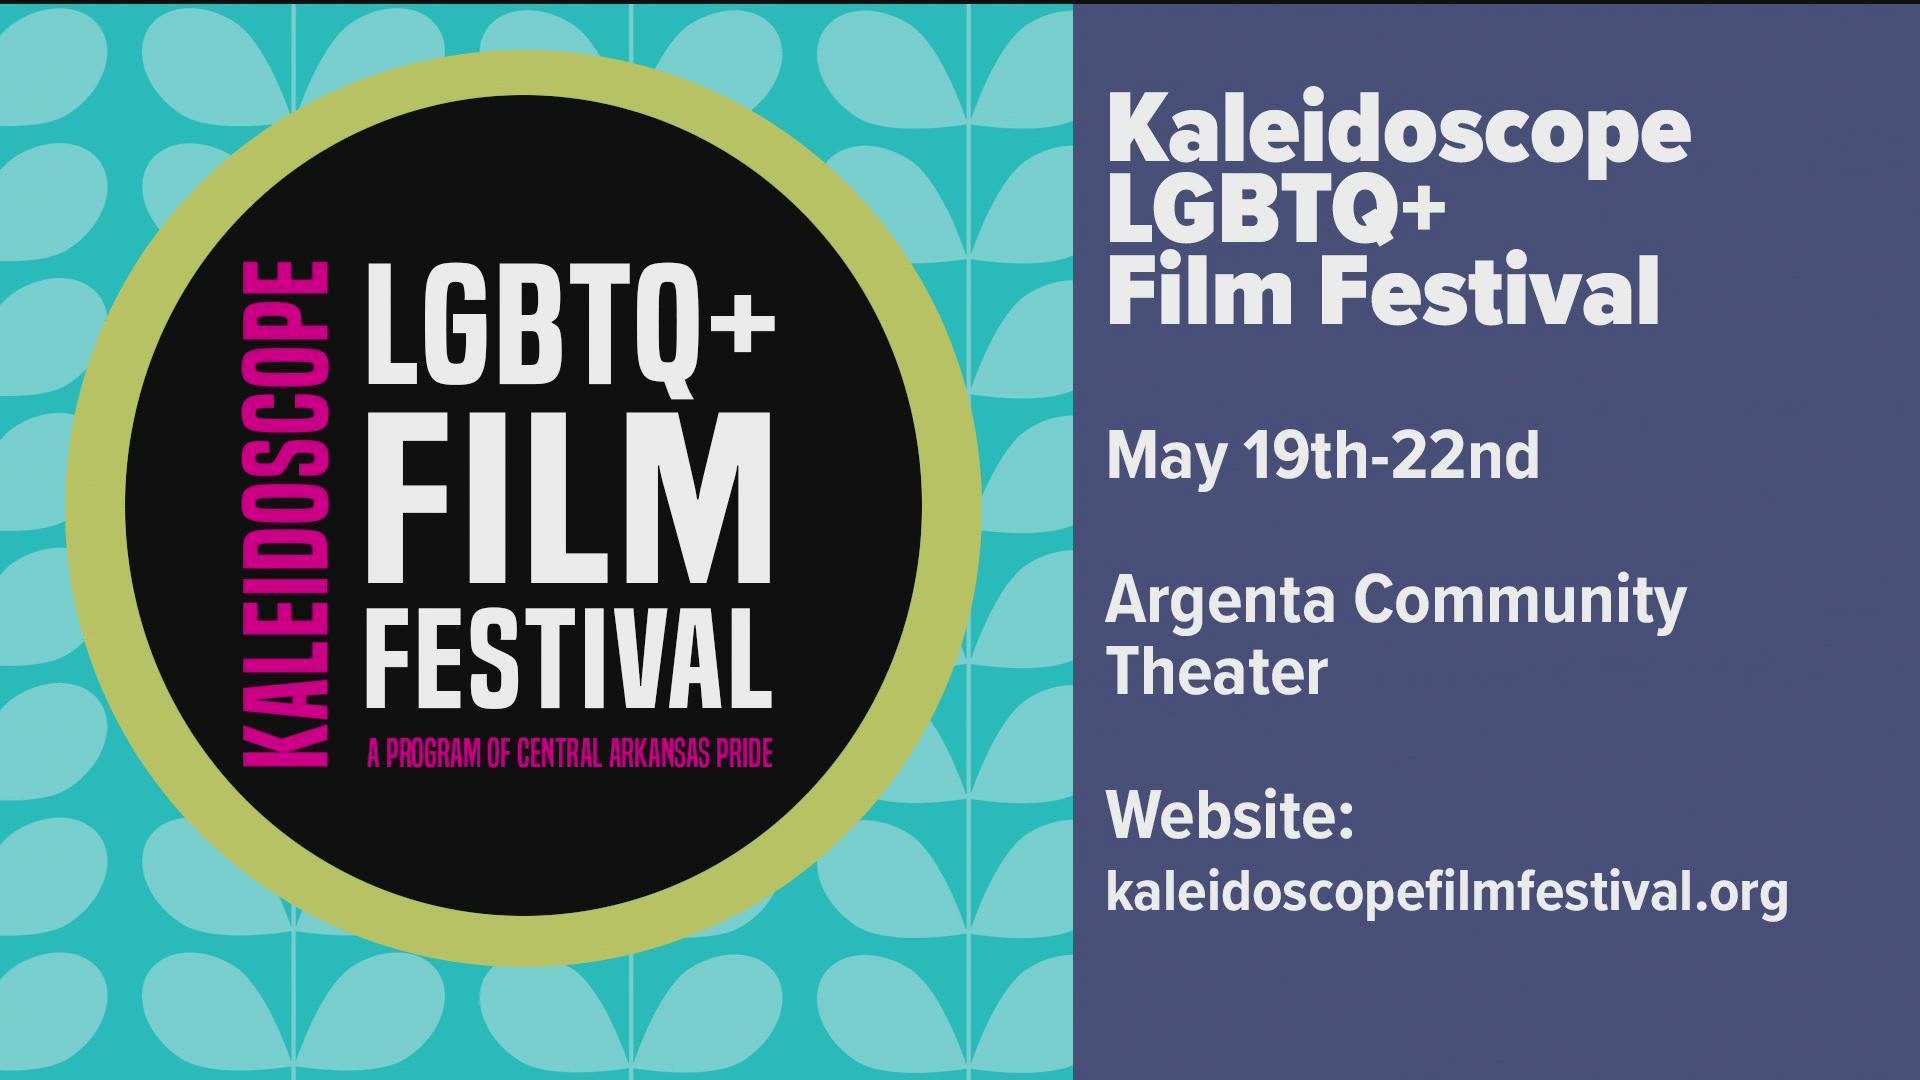 Film lovers listen up, next week Kaleidoscope Film Festival is happening in the Argenta Arts District.  Josh Price is here to talk about it.